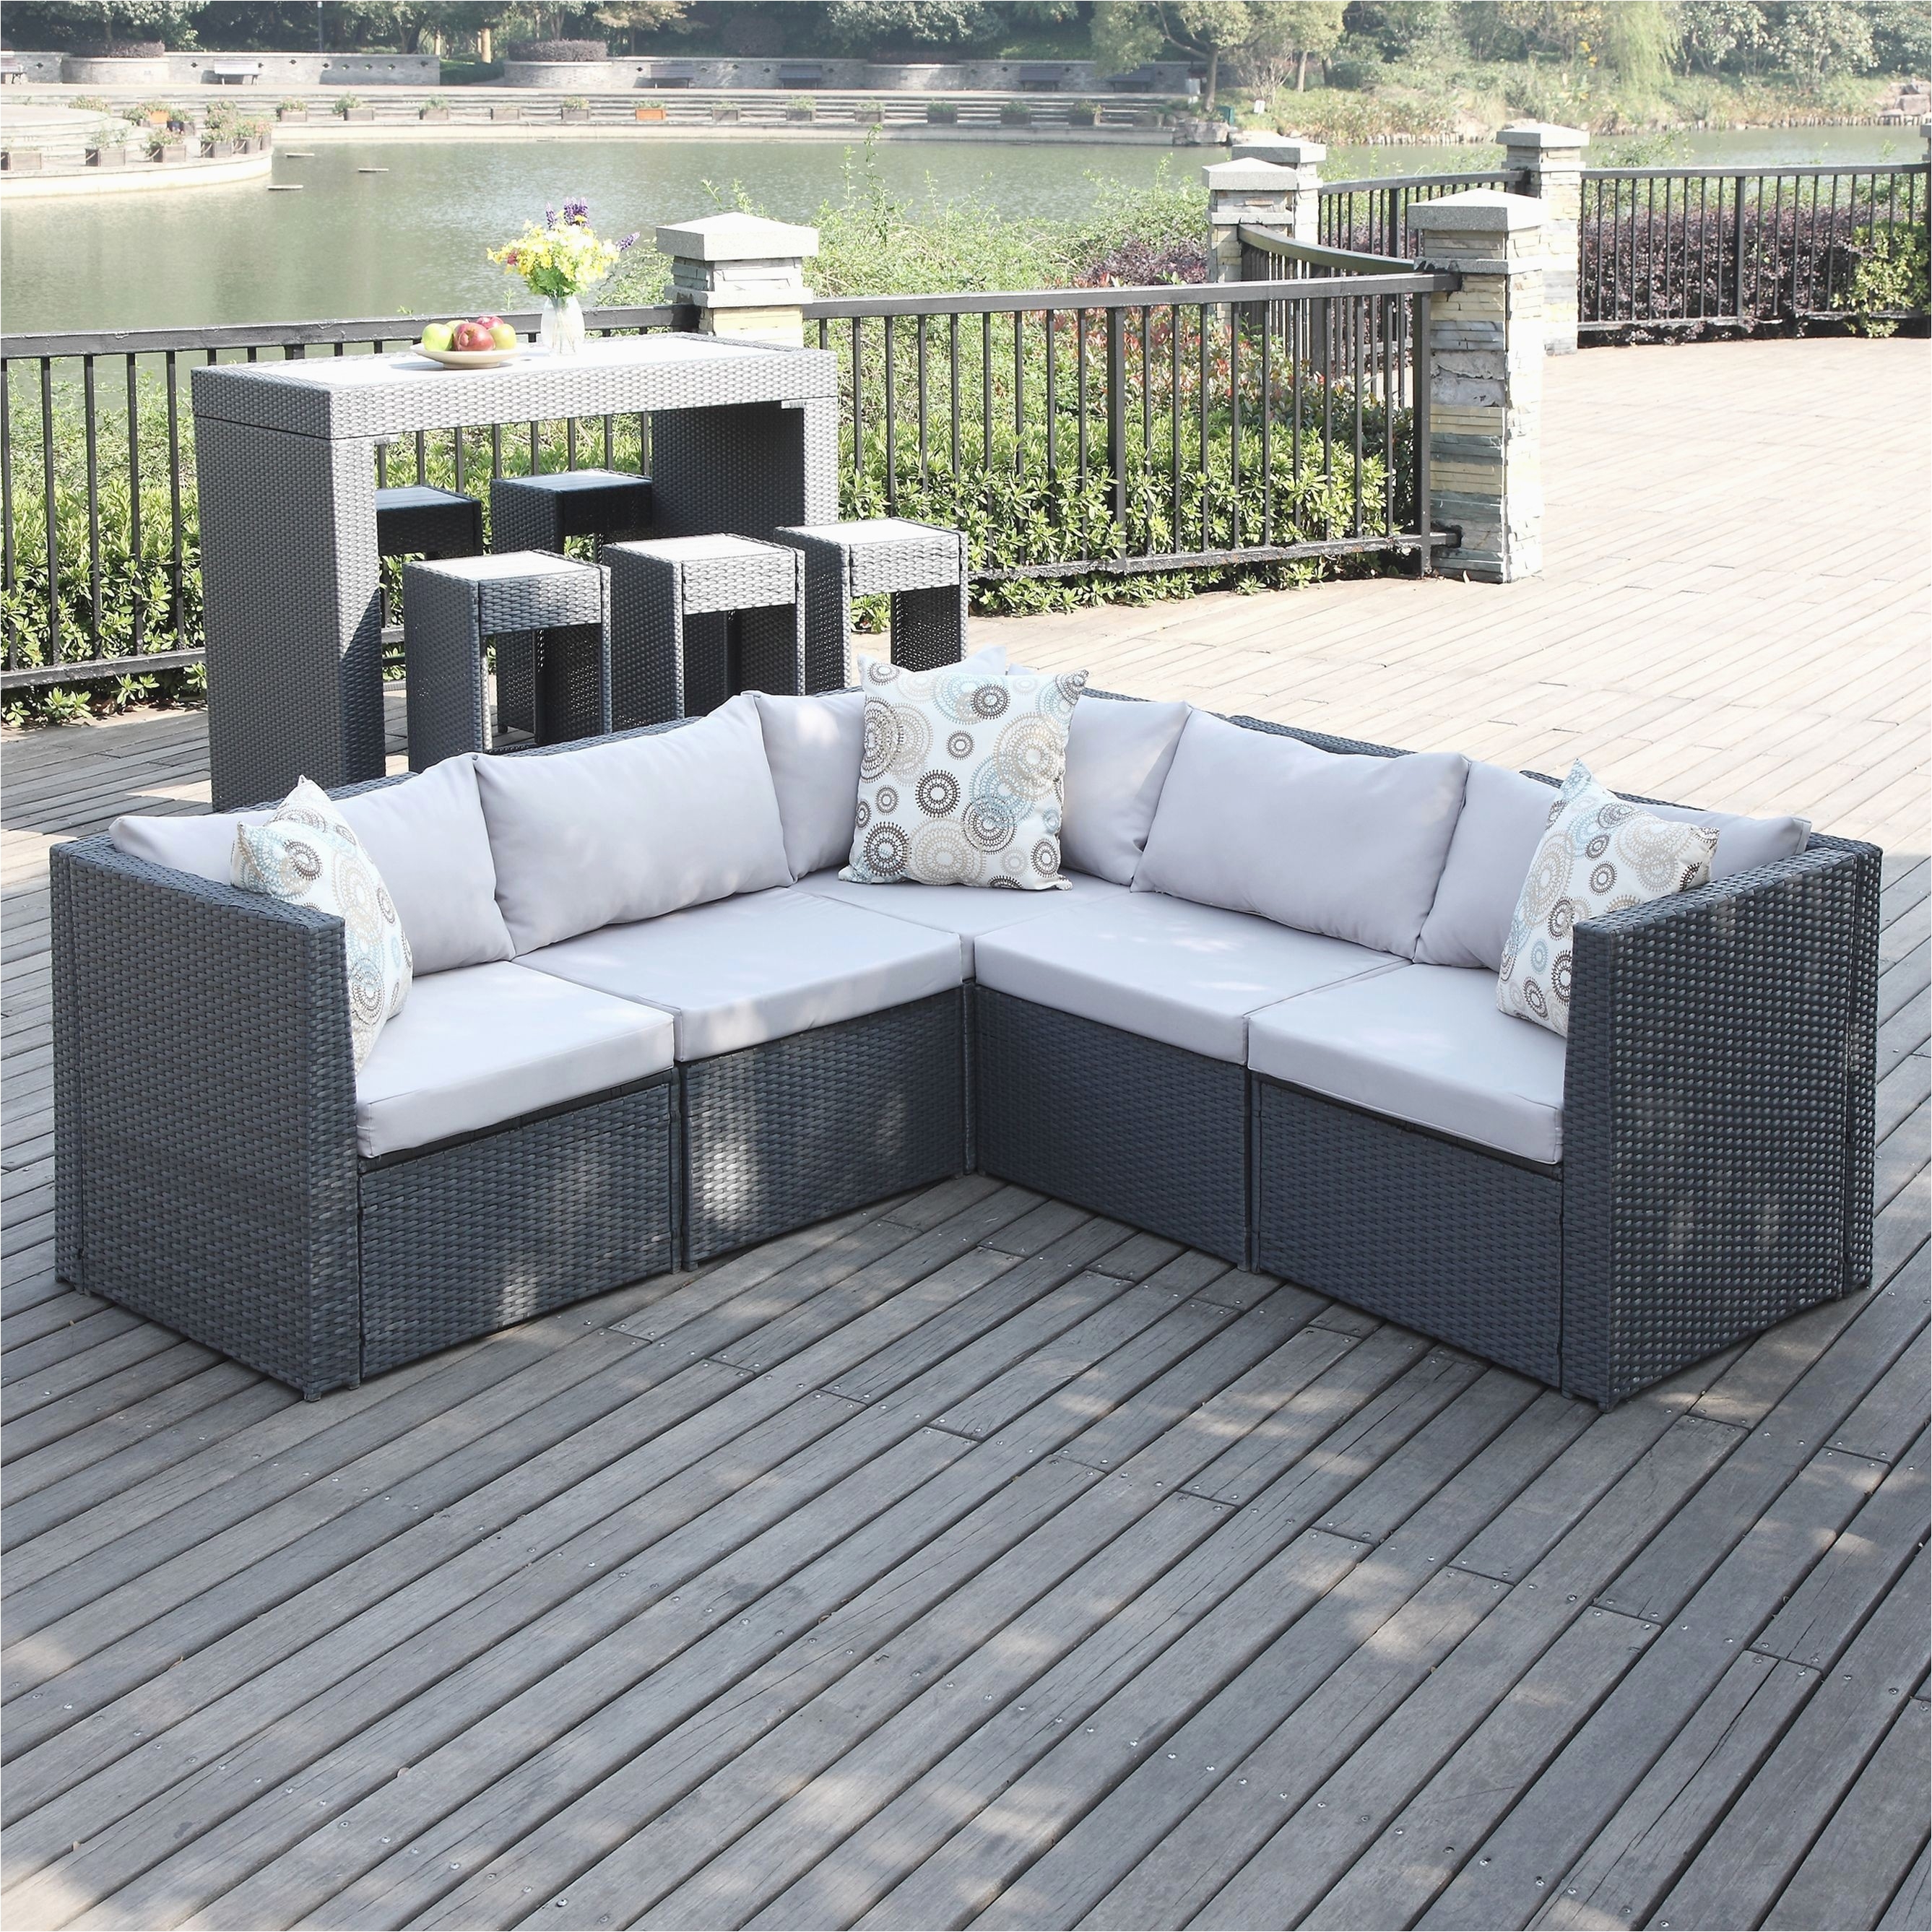 outdoor patio dining table awesome coral coast patio furniture fresh wicker outdoor sofa 0d patio